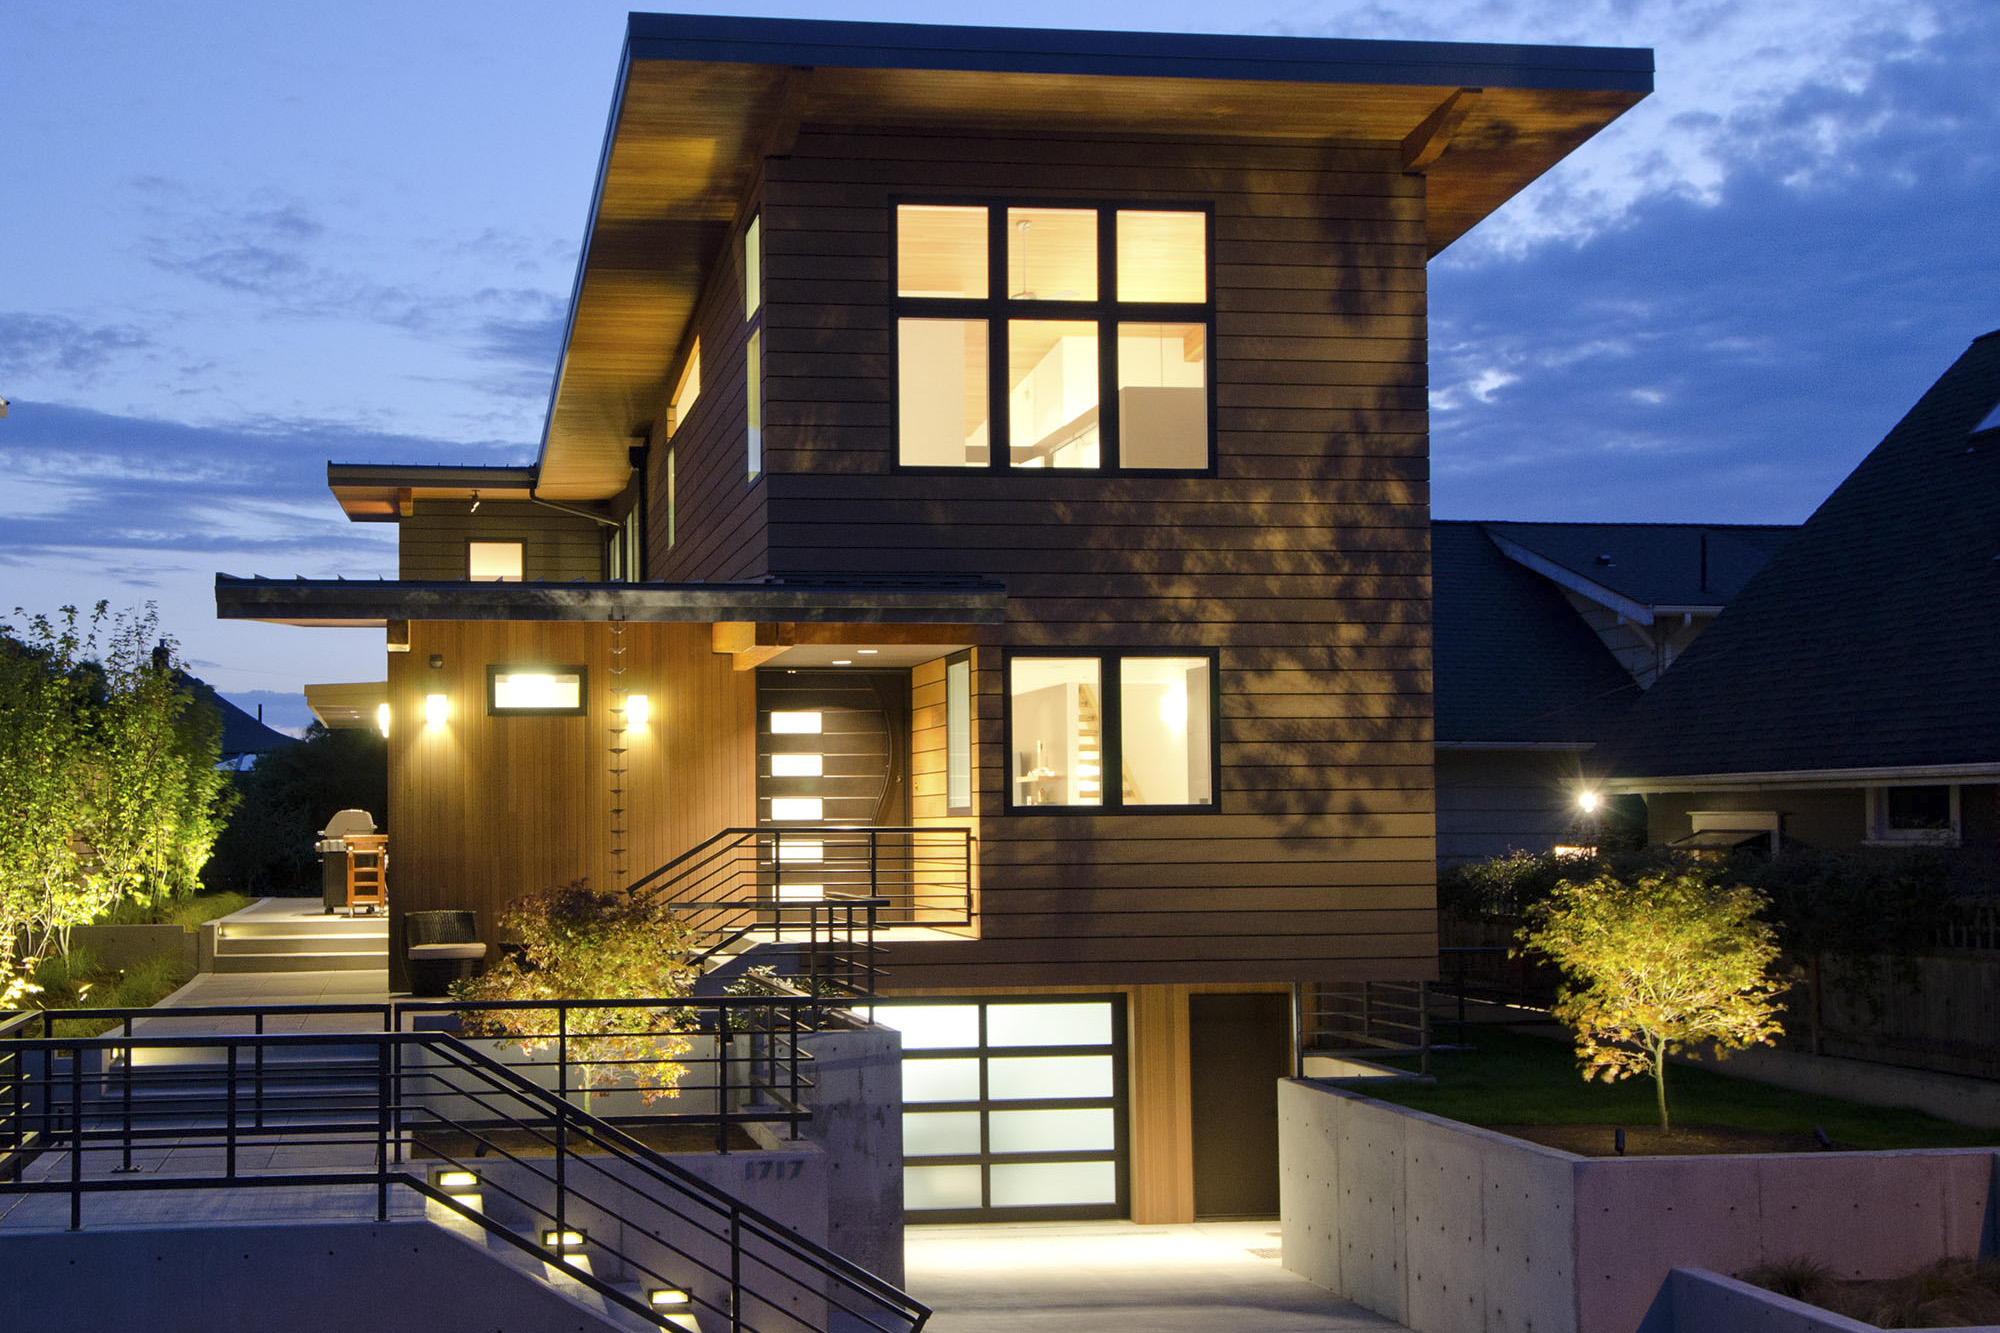 Second slide - Modern home with butterfly roof clad in cedar and rainscreen at night